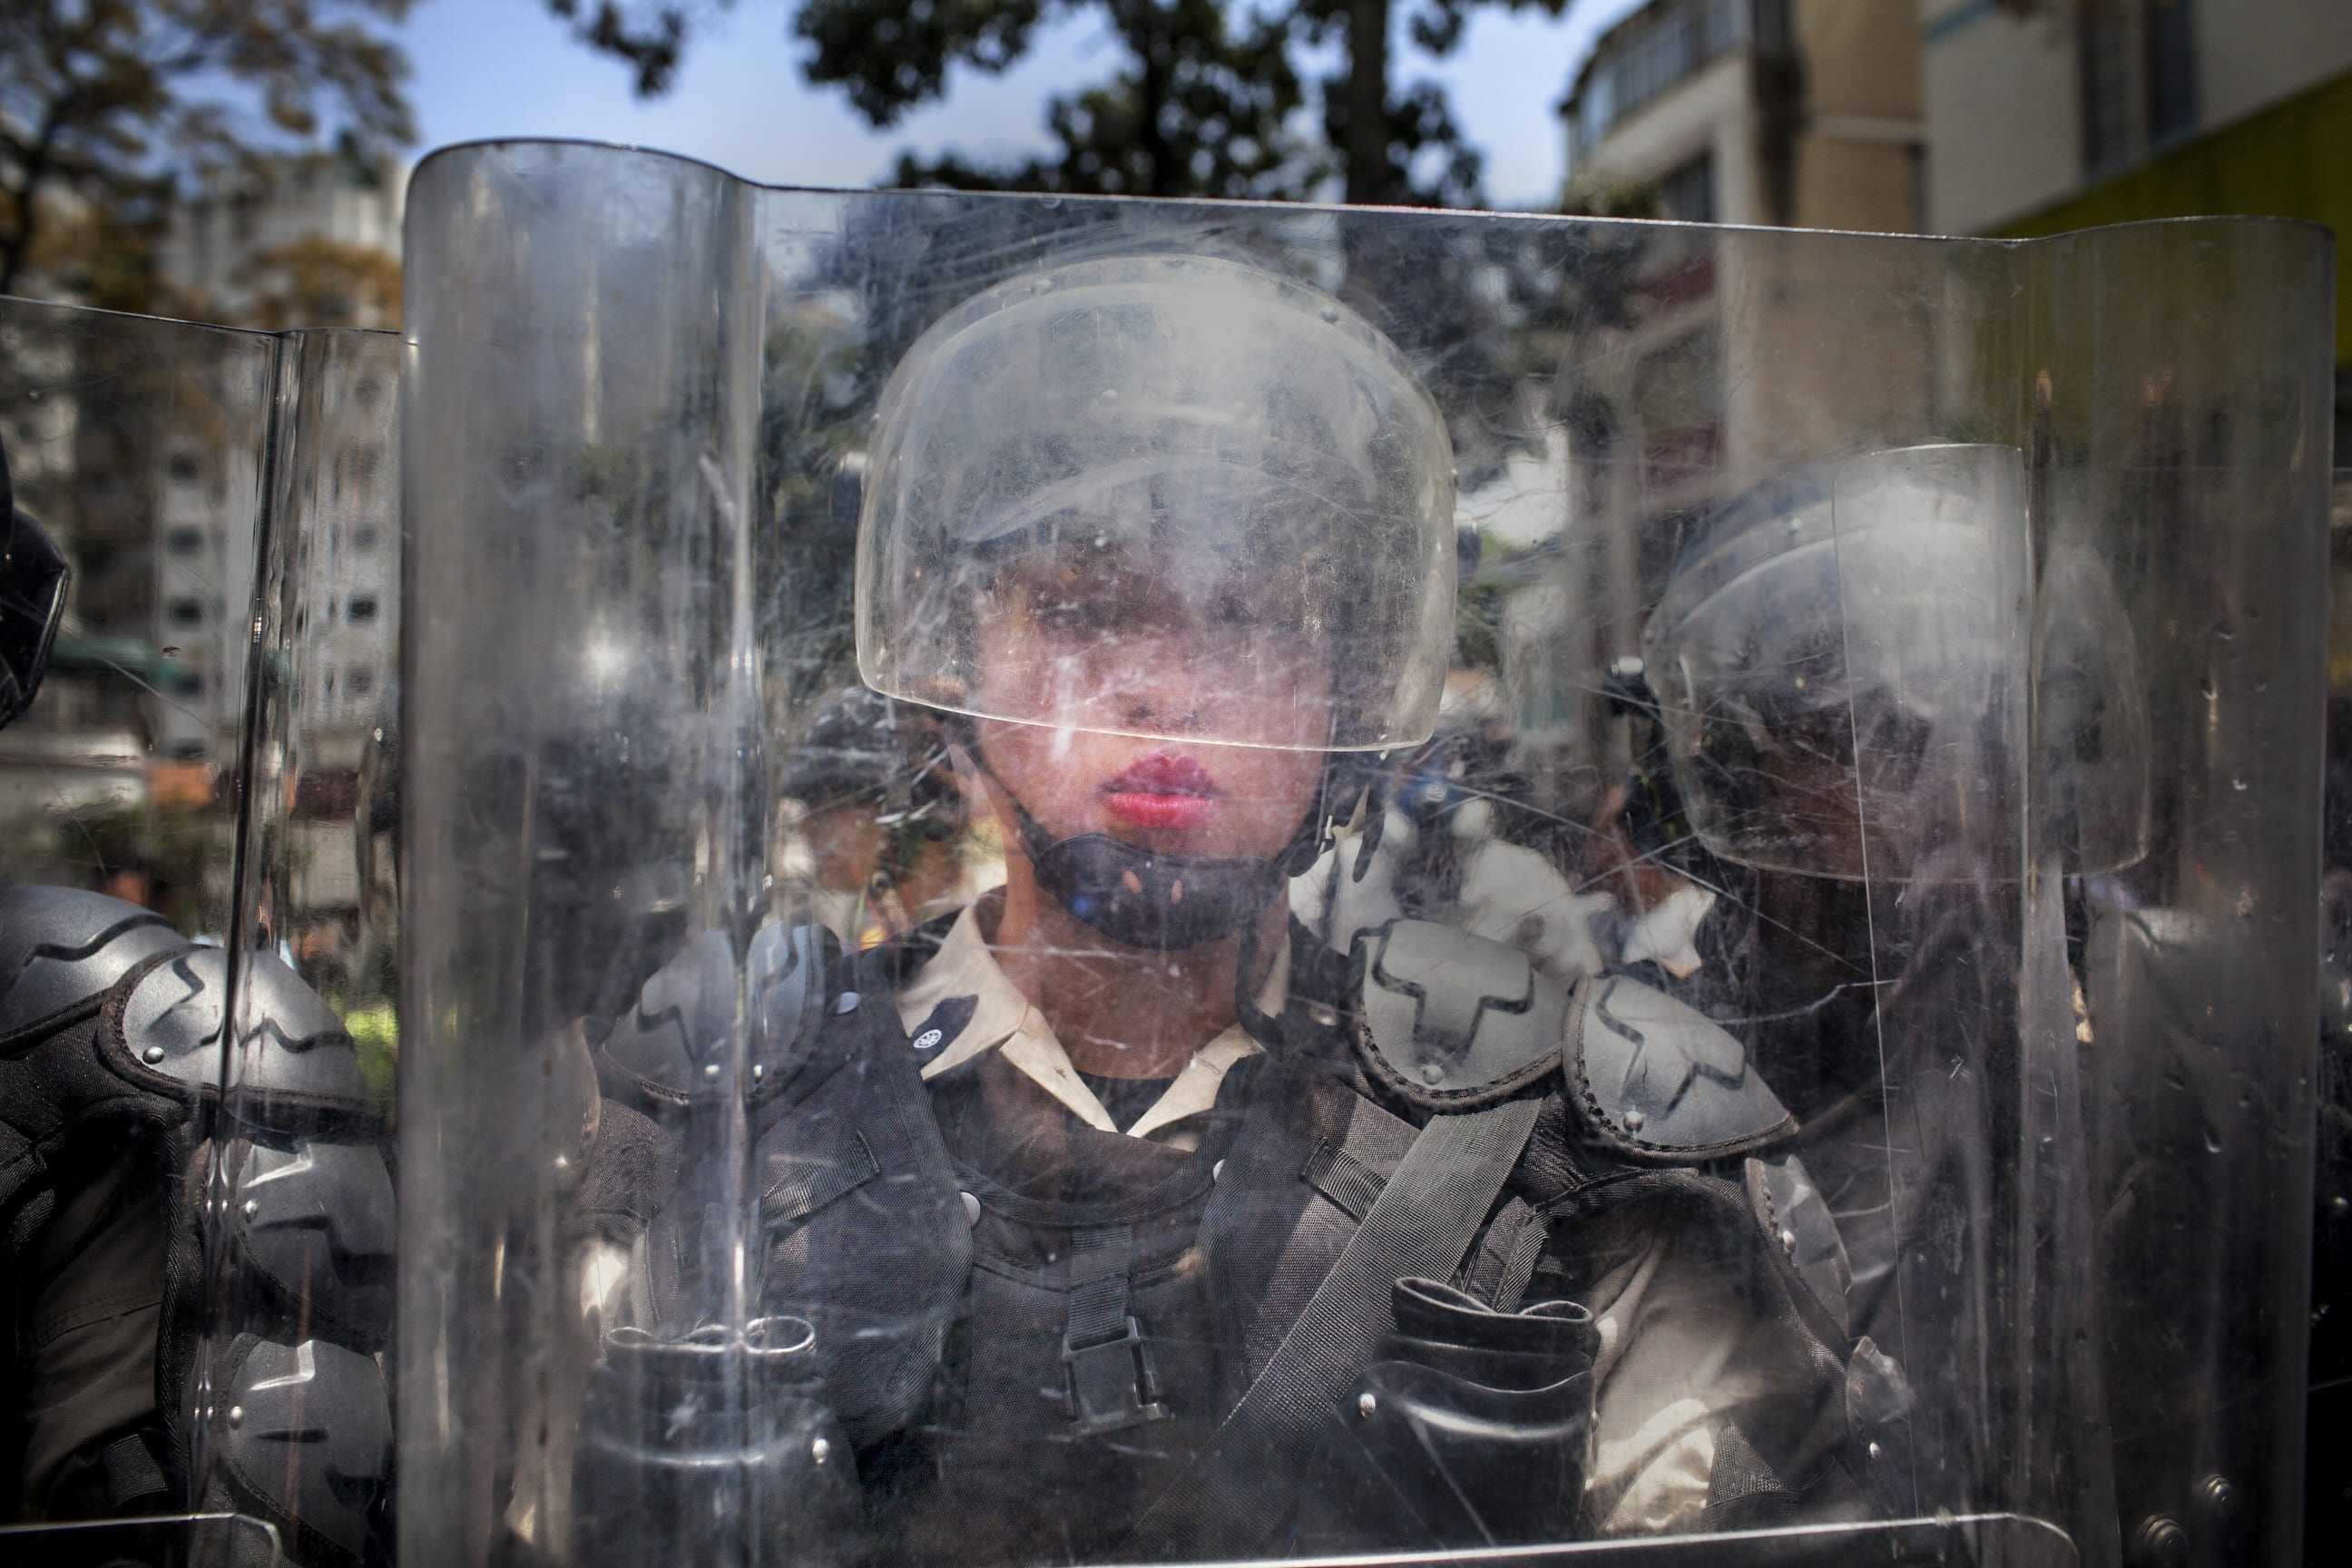 March 6th, 2014. Caracas, Venezuela. A National Police officer behind a riot shield is pushed backwards by a crush of demonstrators during the March of the Empty Pots, which coincided with International Women's Day.